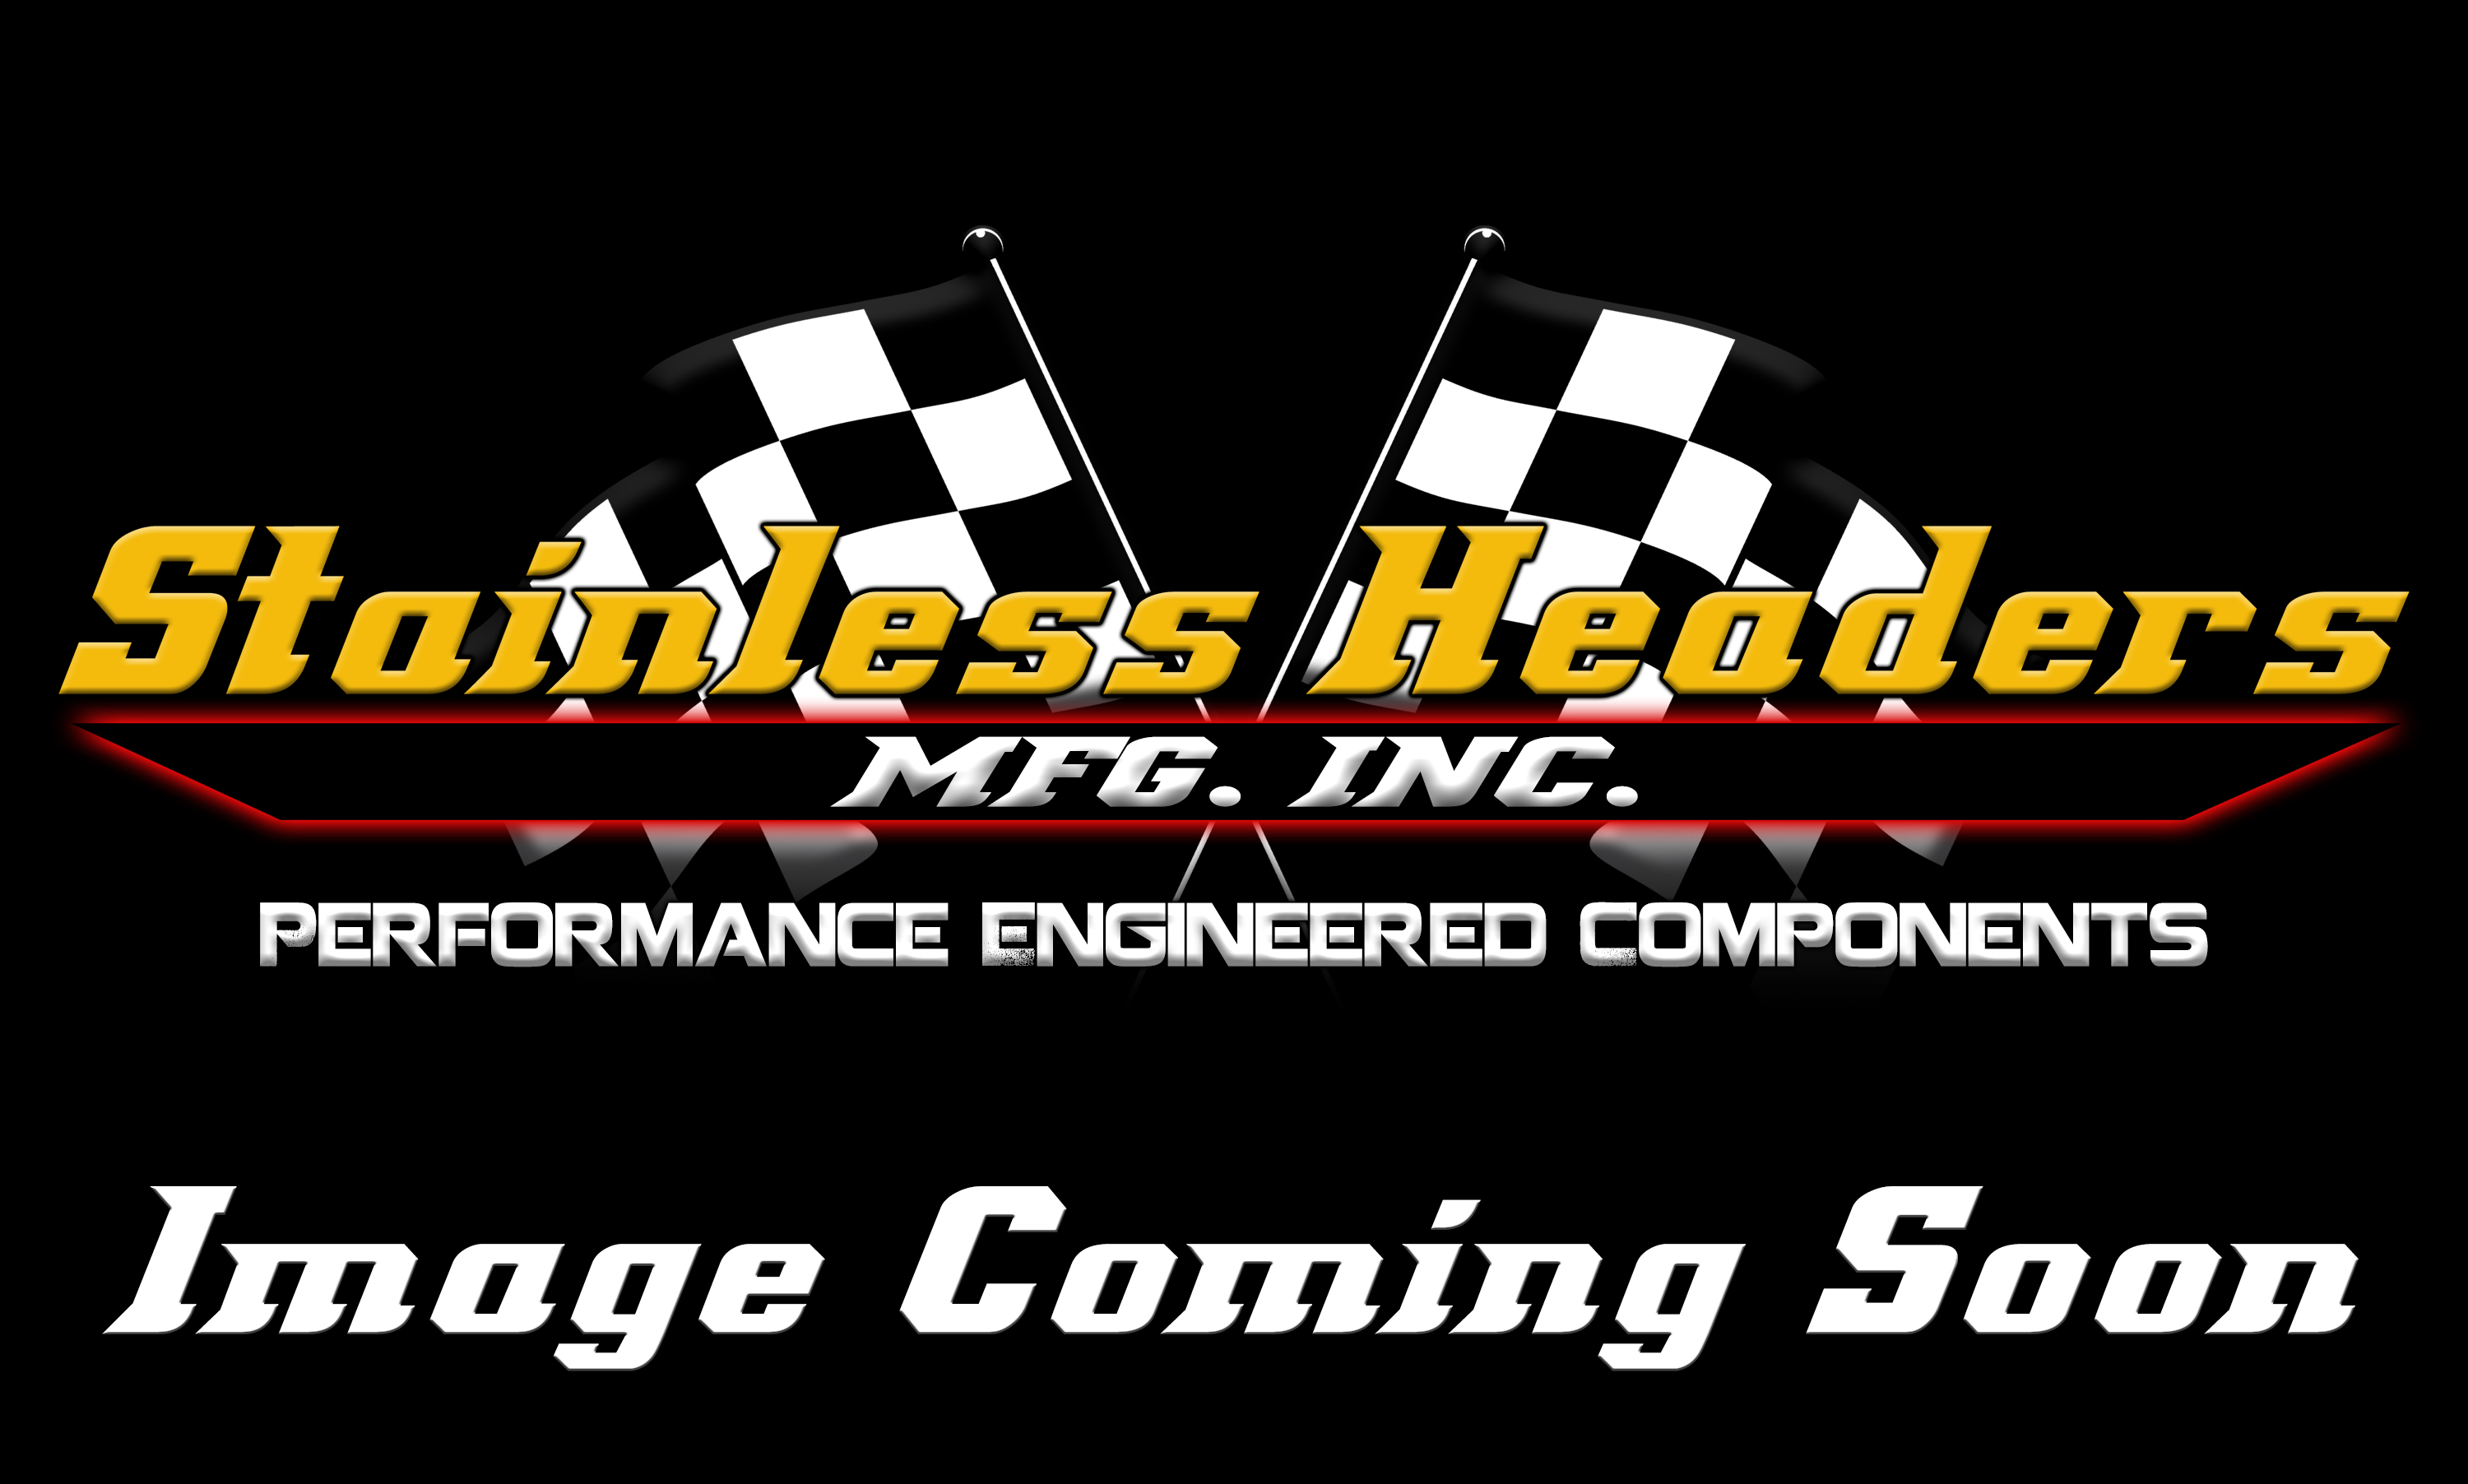 CompTurbo Technologies - CTR4202R-7290 Mid Frame Oil Lubricated 2.0 Turbocharger (1250 HP) - Image 3